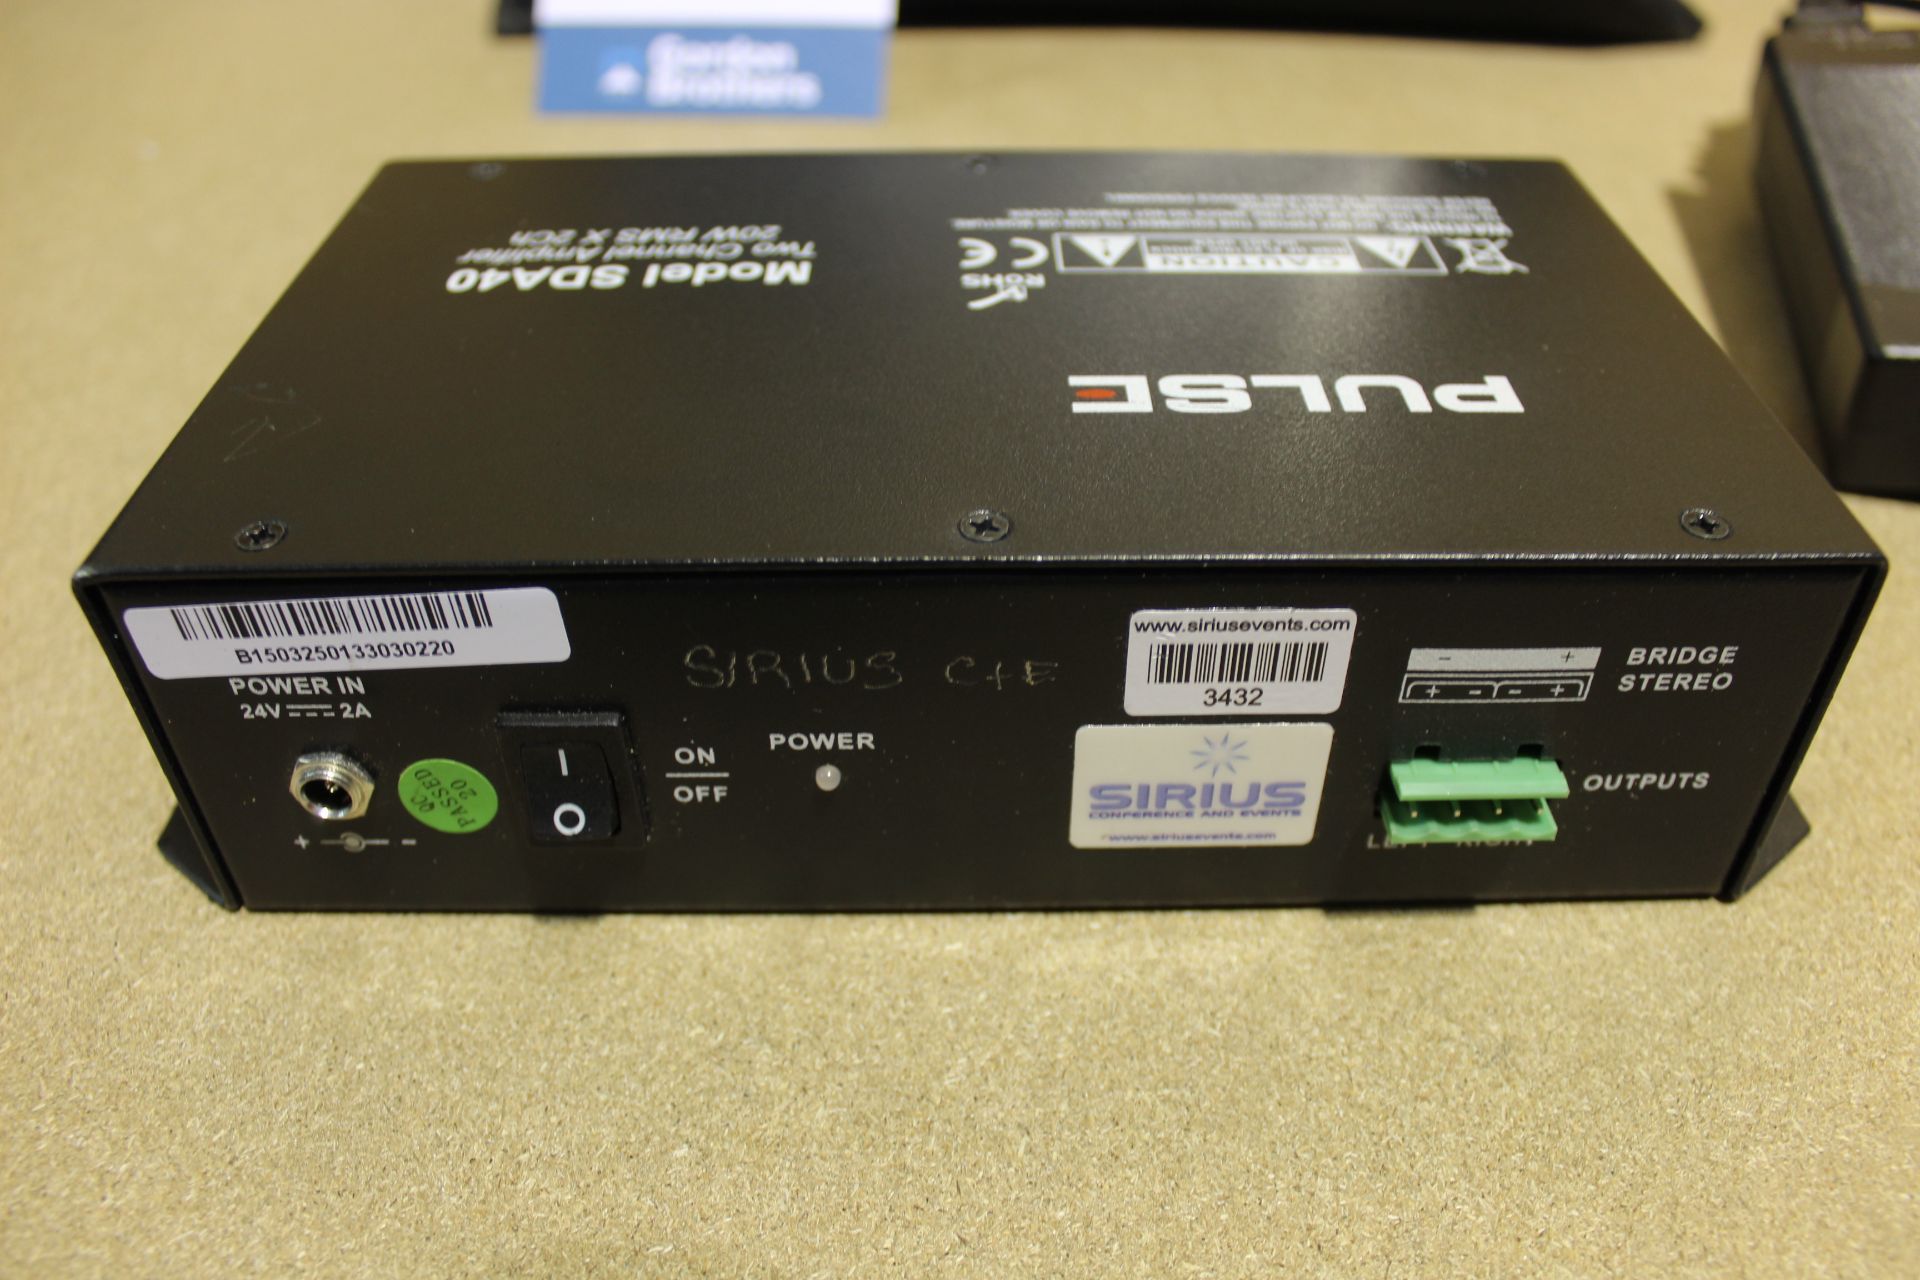 Pulse Compact SDA40 20W RMS x 2 channel stereo amplifier with 1x PSU (Purchased in 2014 - 2018 - Image 3 of 4